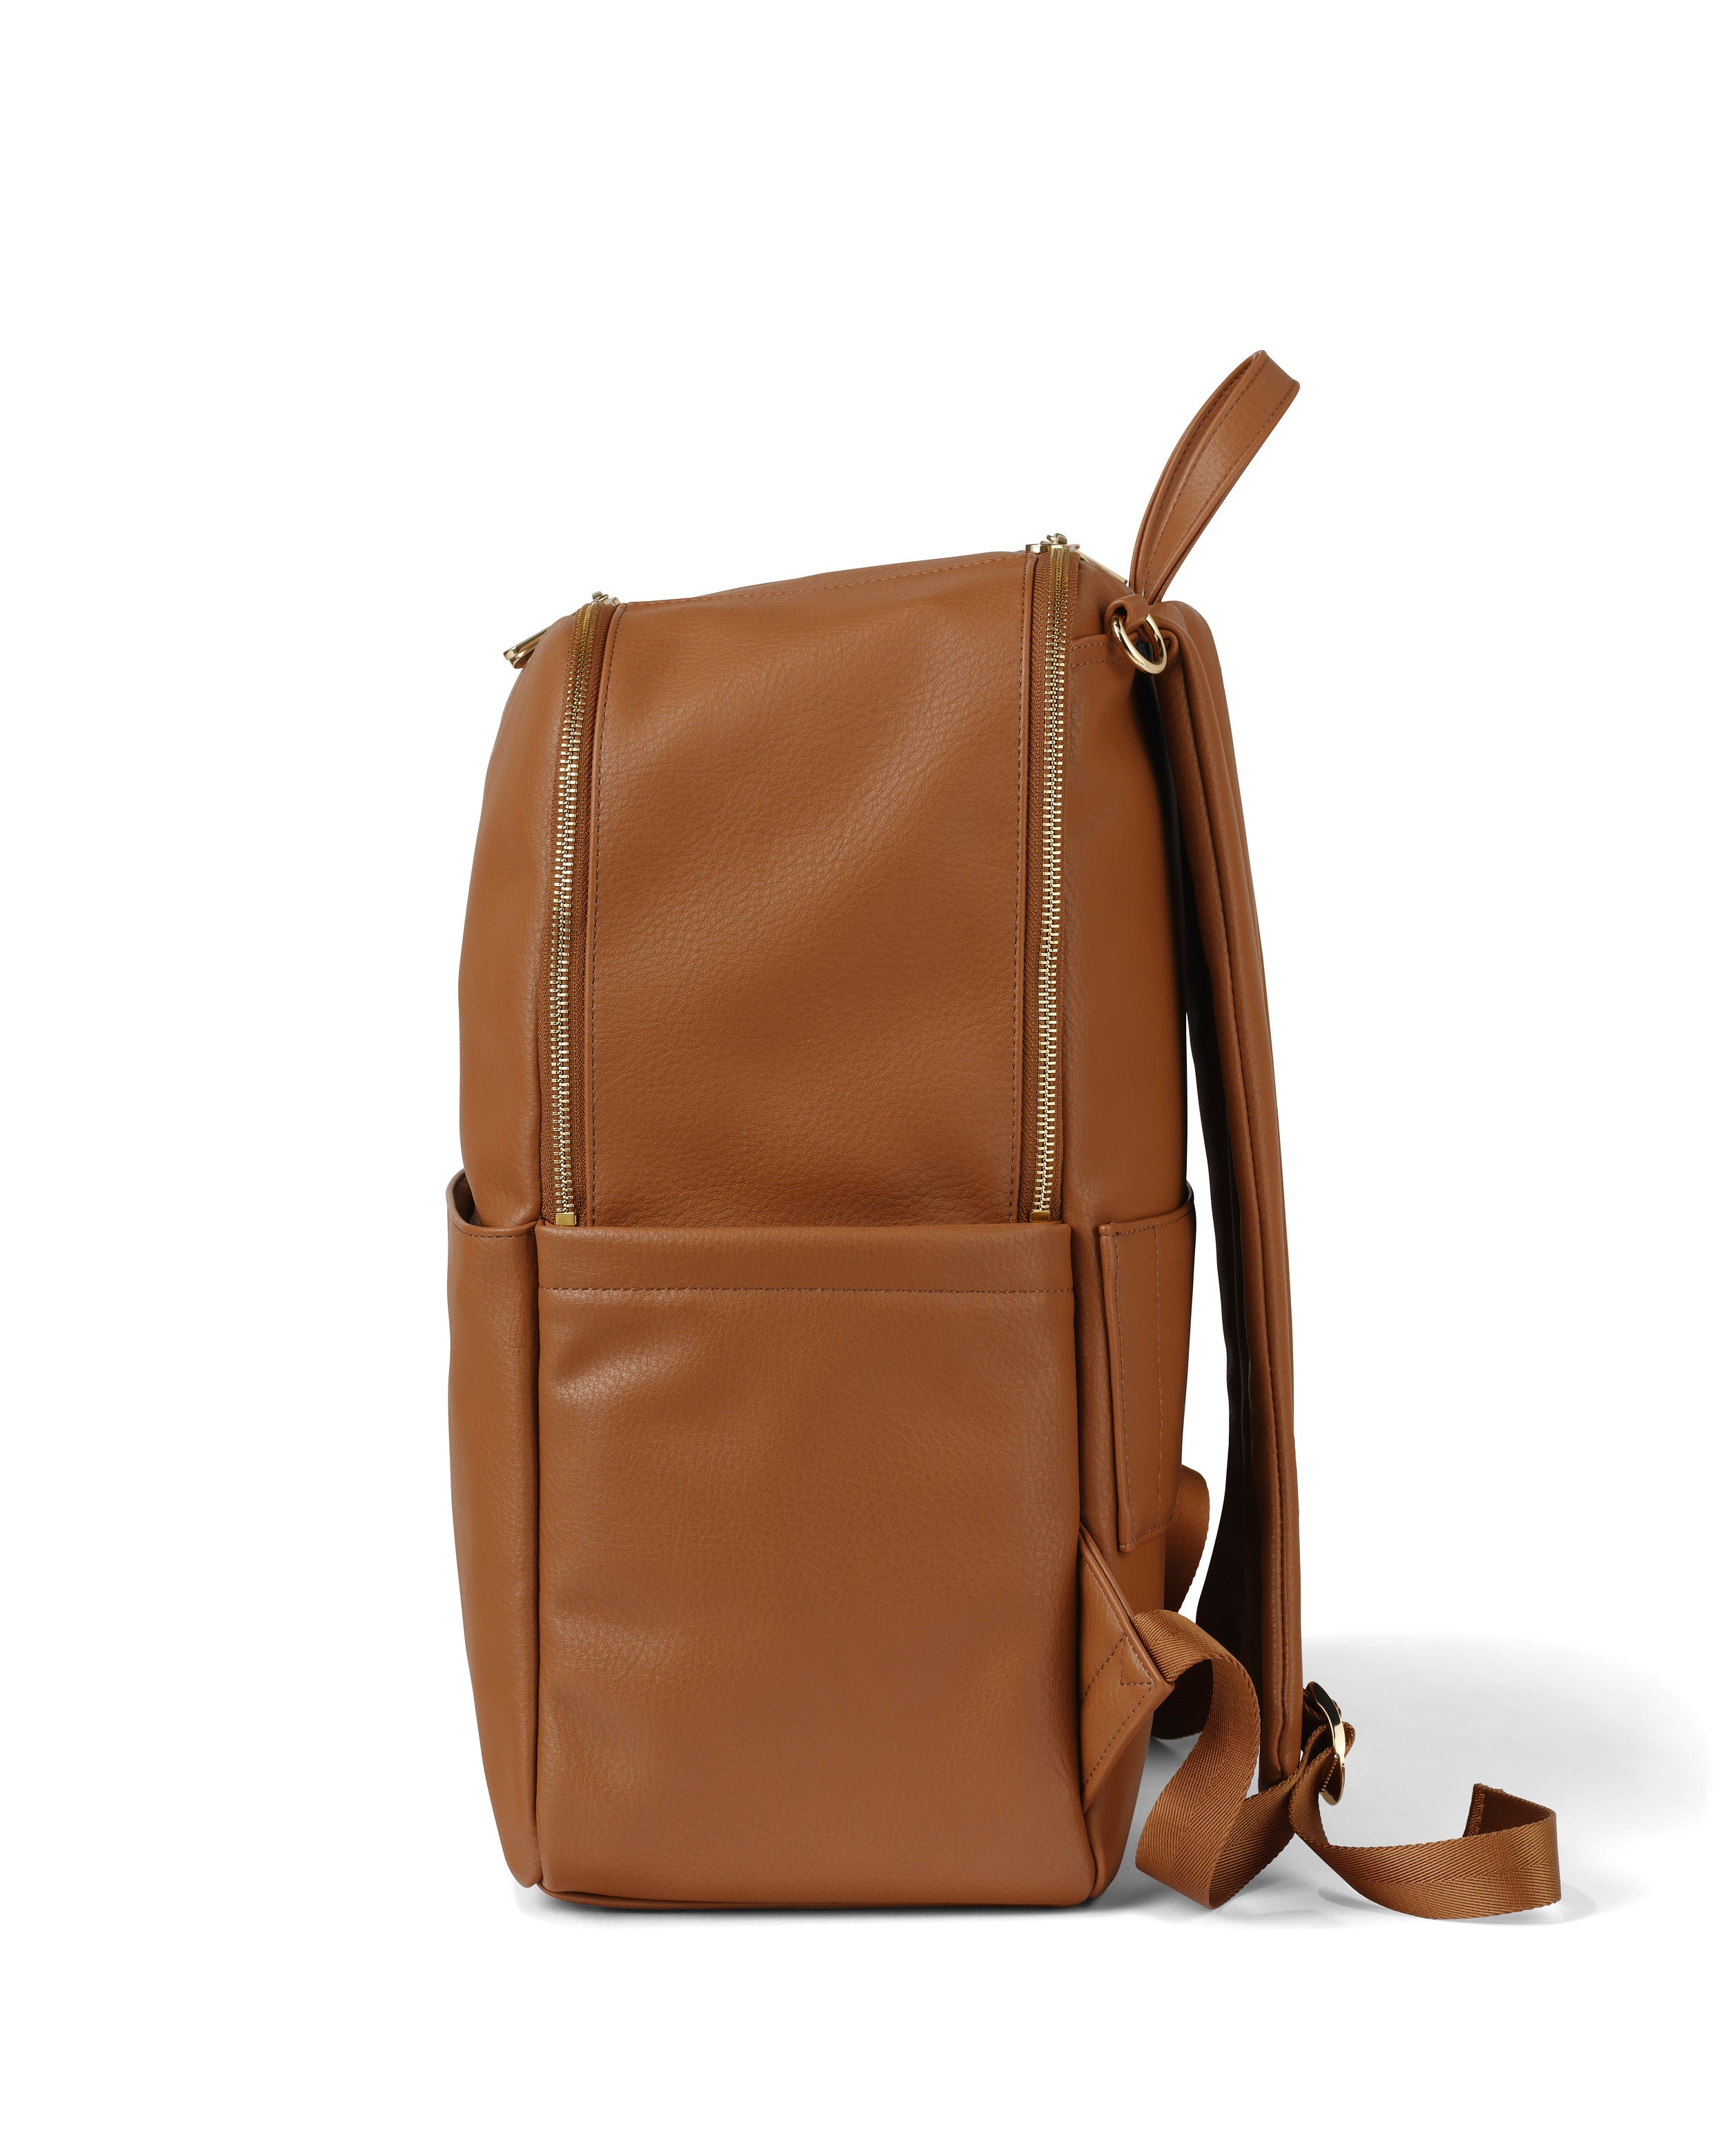 OiOi Multitasker Nappy Backpack Chestnut Faux Leather